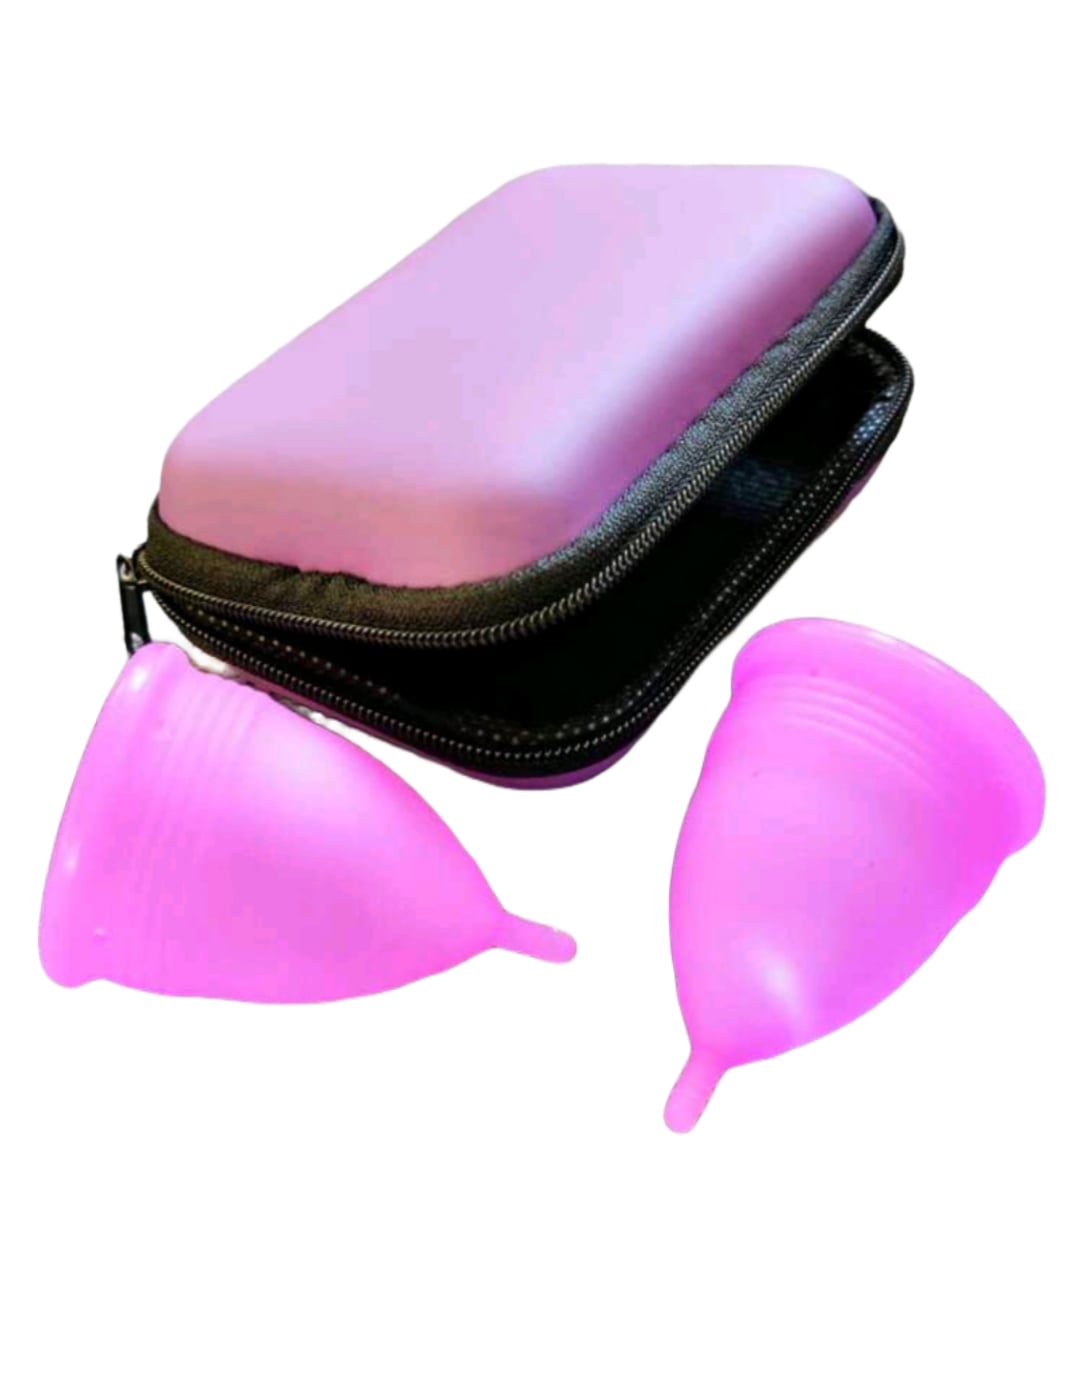 2 PIECES OF MENSTRUAL CUP IN A CASE (Size S/Pink)